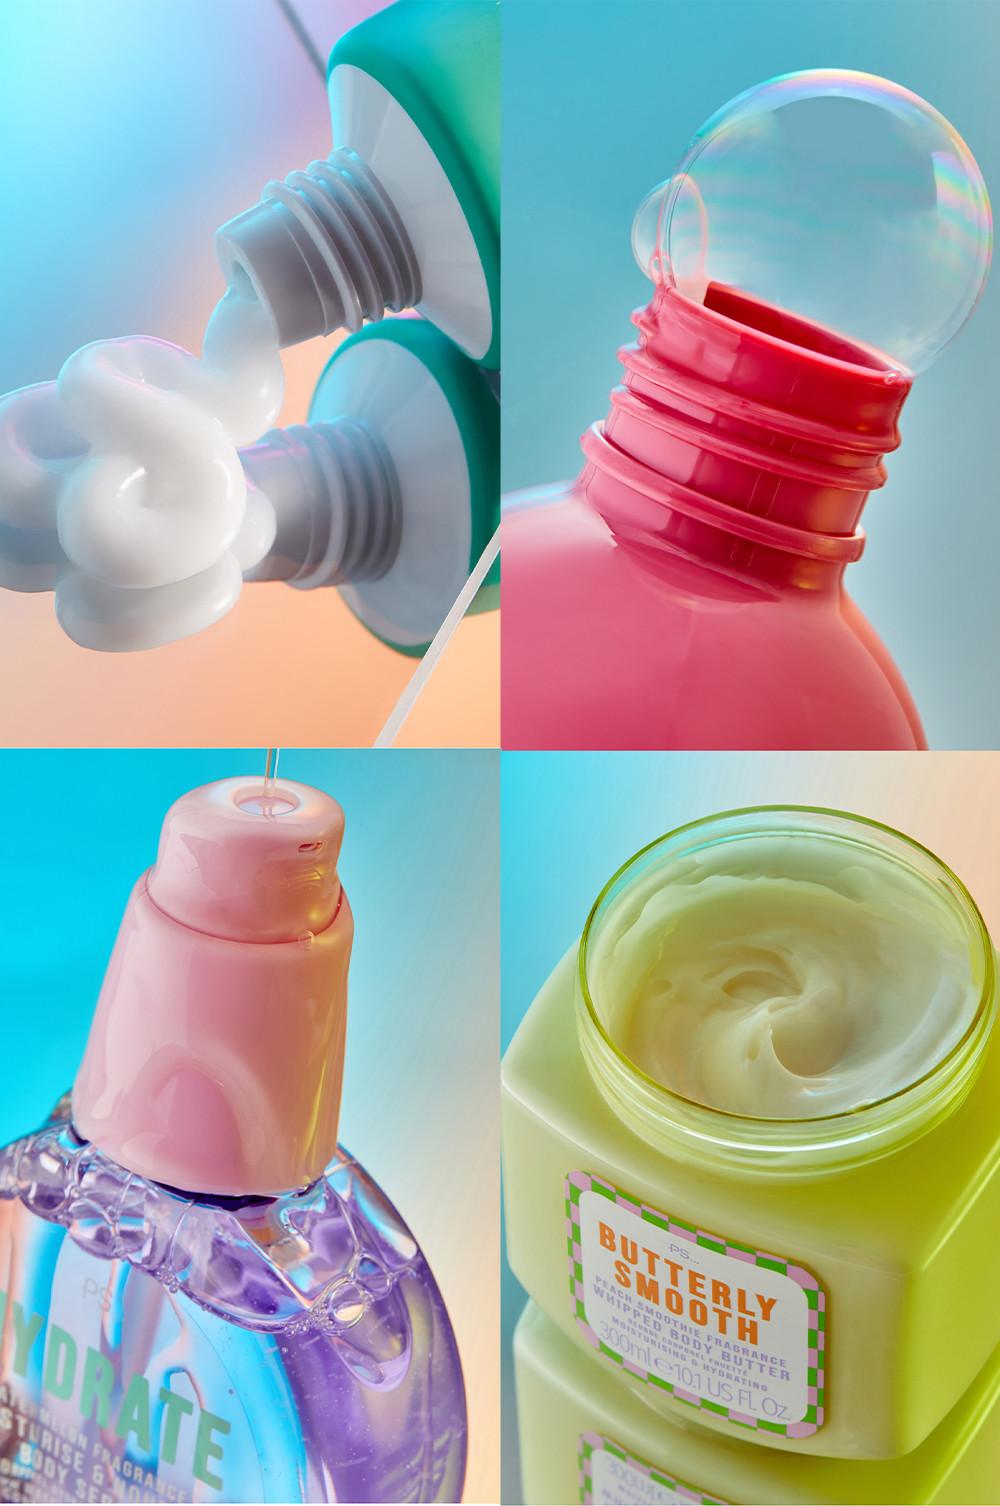 Close ups of products